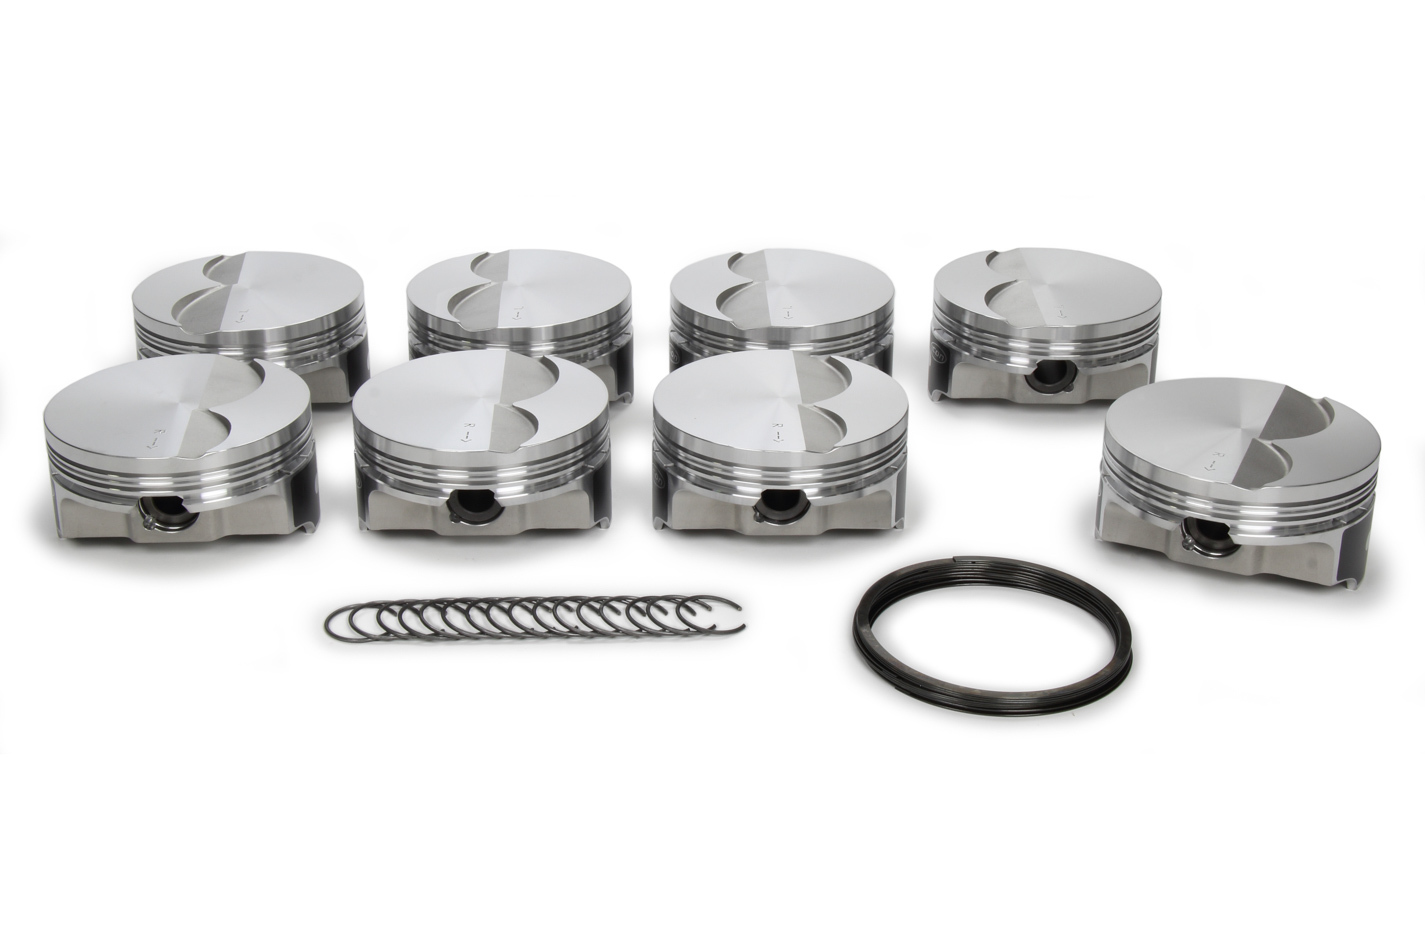 Icon Pistons IC9991C.030 Piston, FHR, Forged, 4.030 in Bore, 1.5 x 1.5 x 3.0 mm Ring Groove, Minus 3.30 cc, GM LS-Series, Set of 8